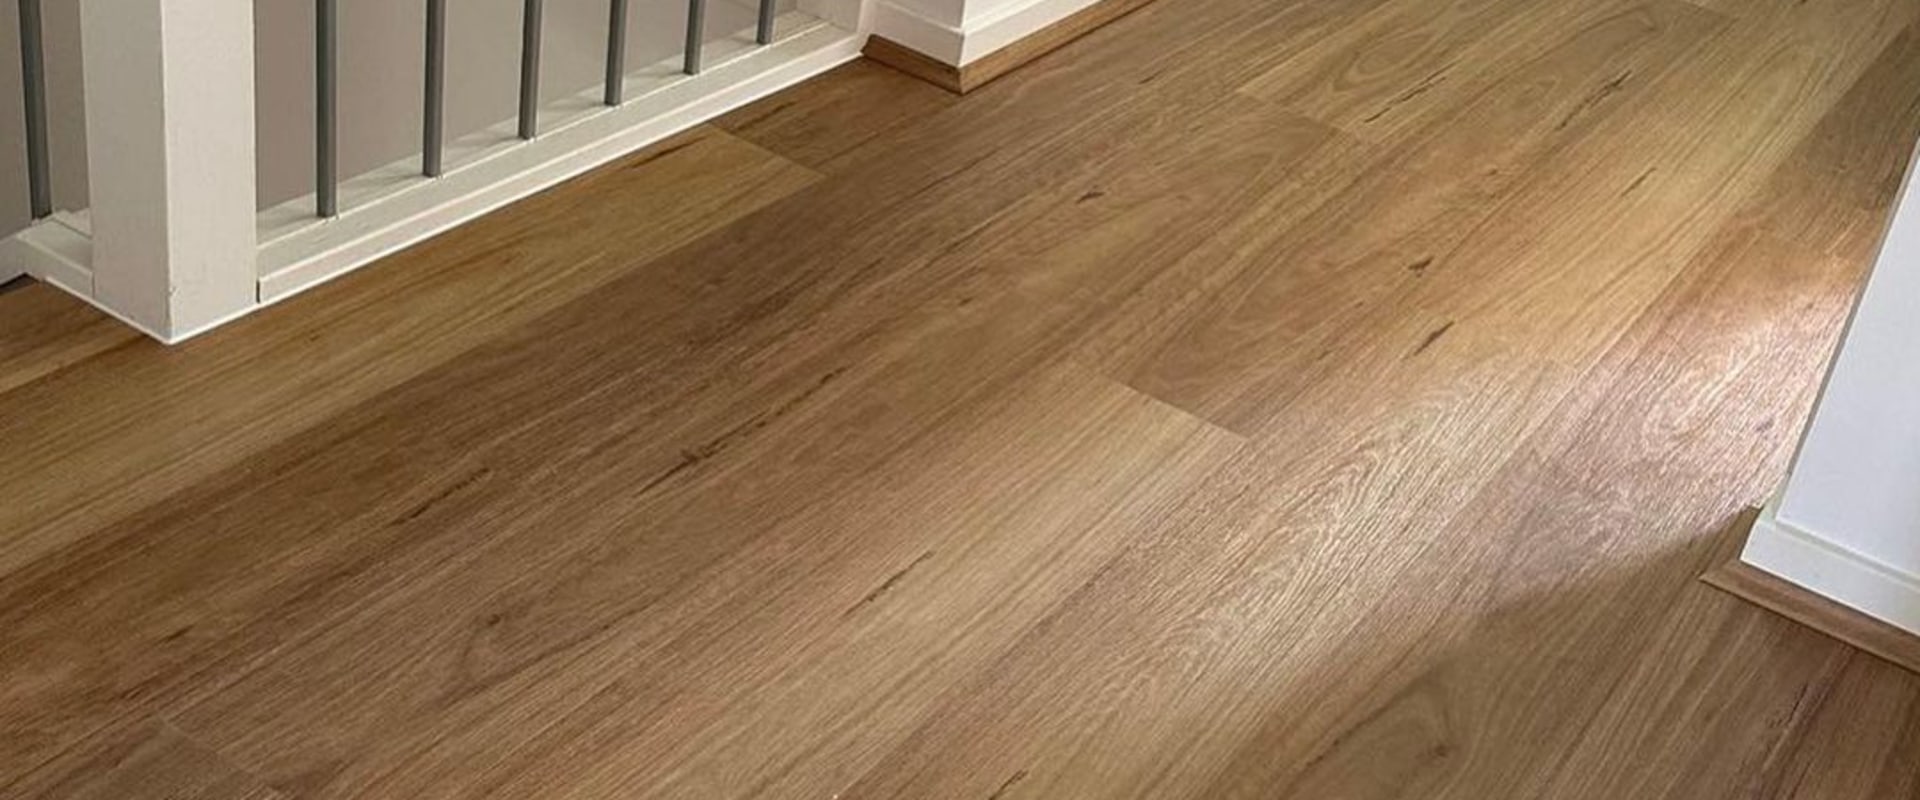 How long does laminate flooring settle after installation?